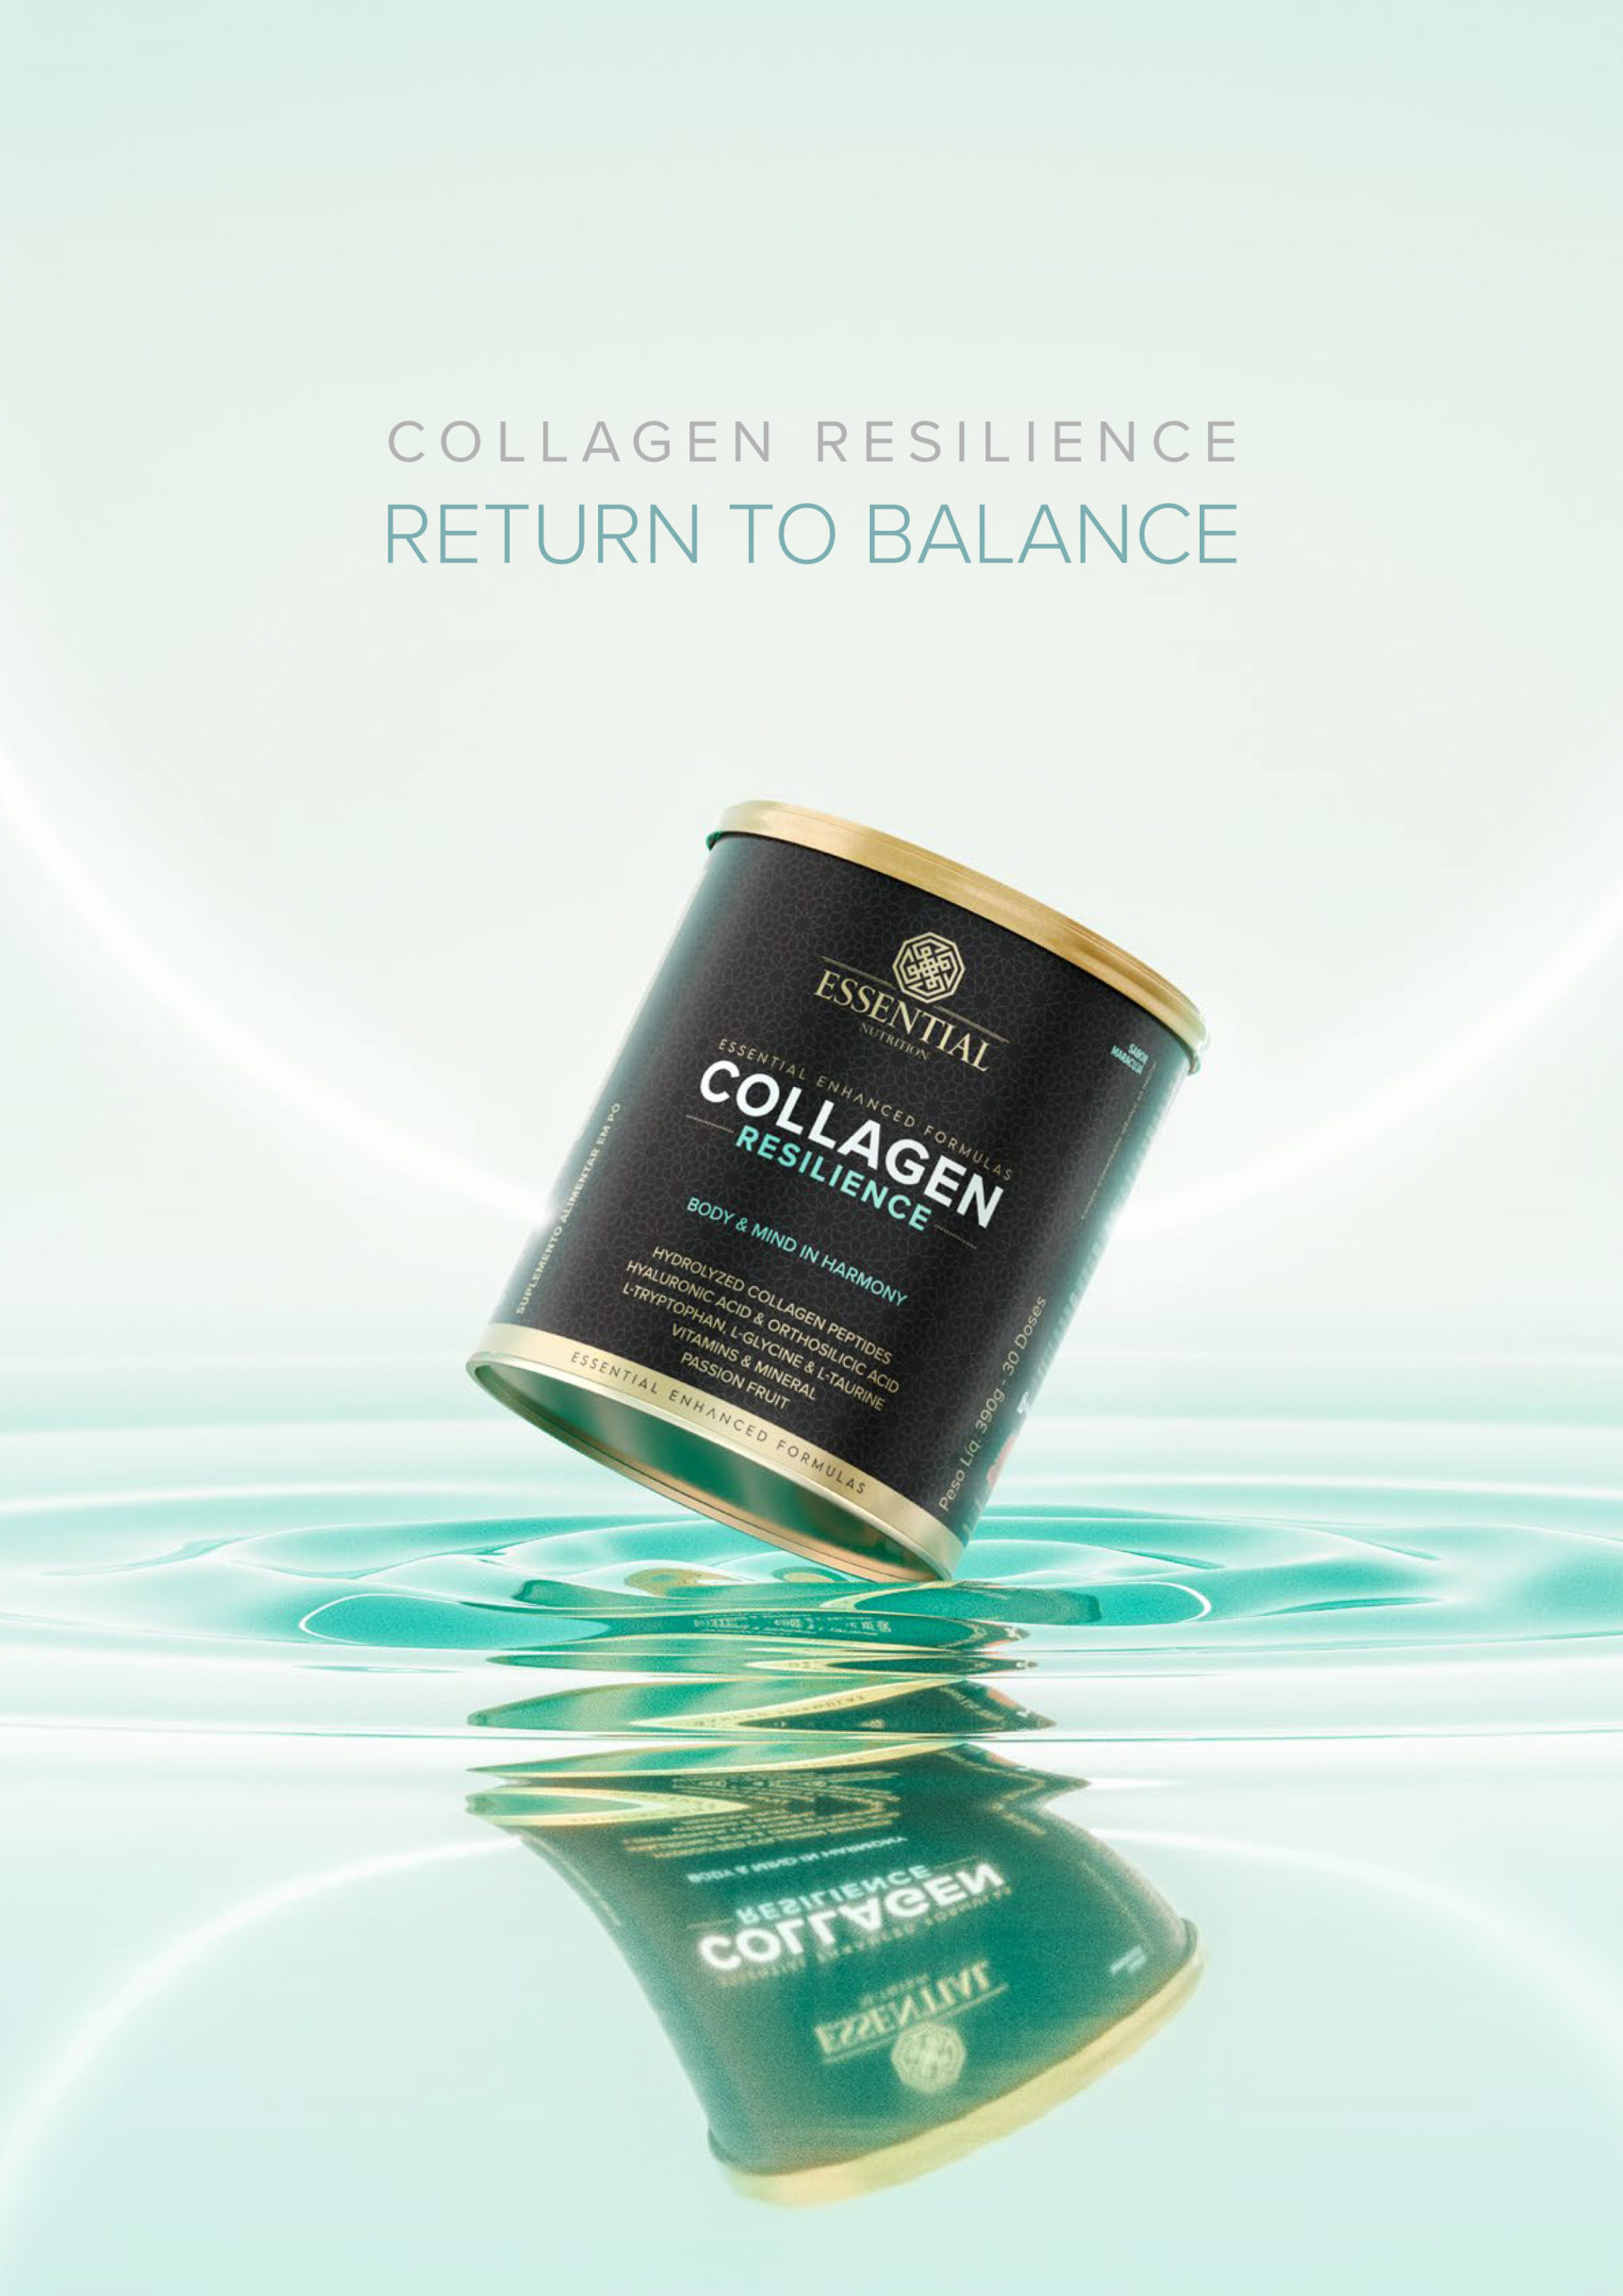 Collagen Resilience